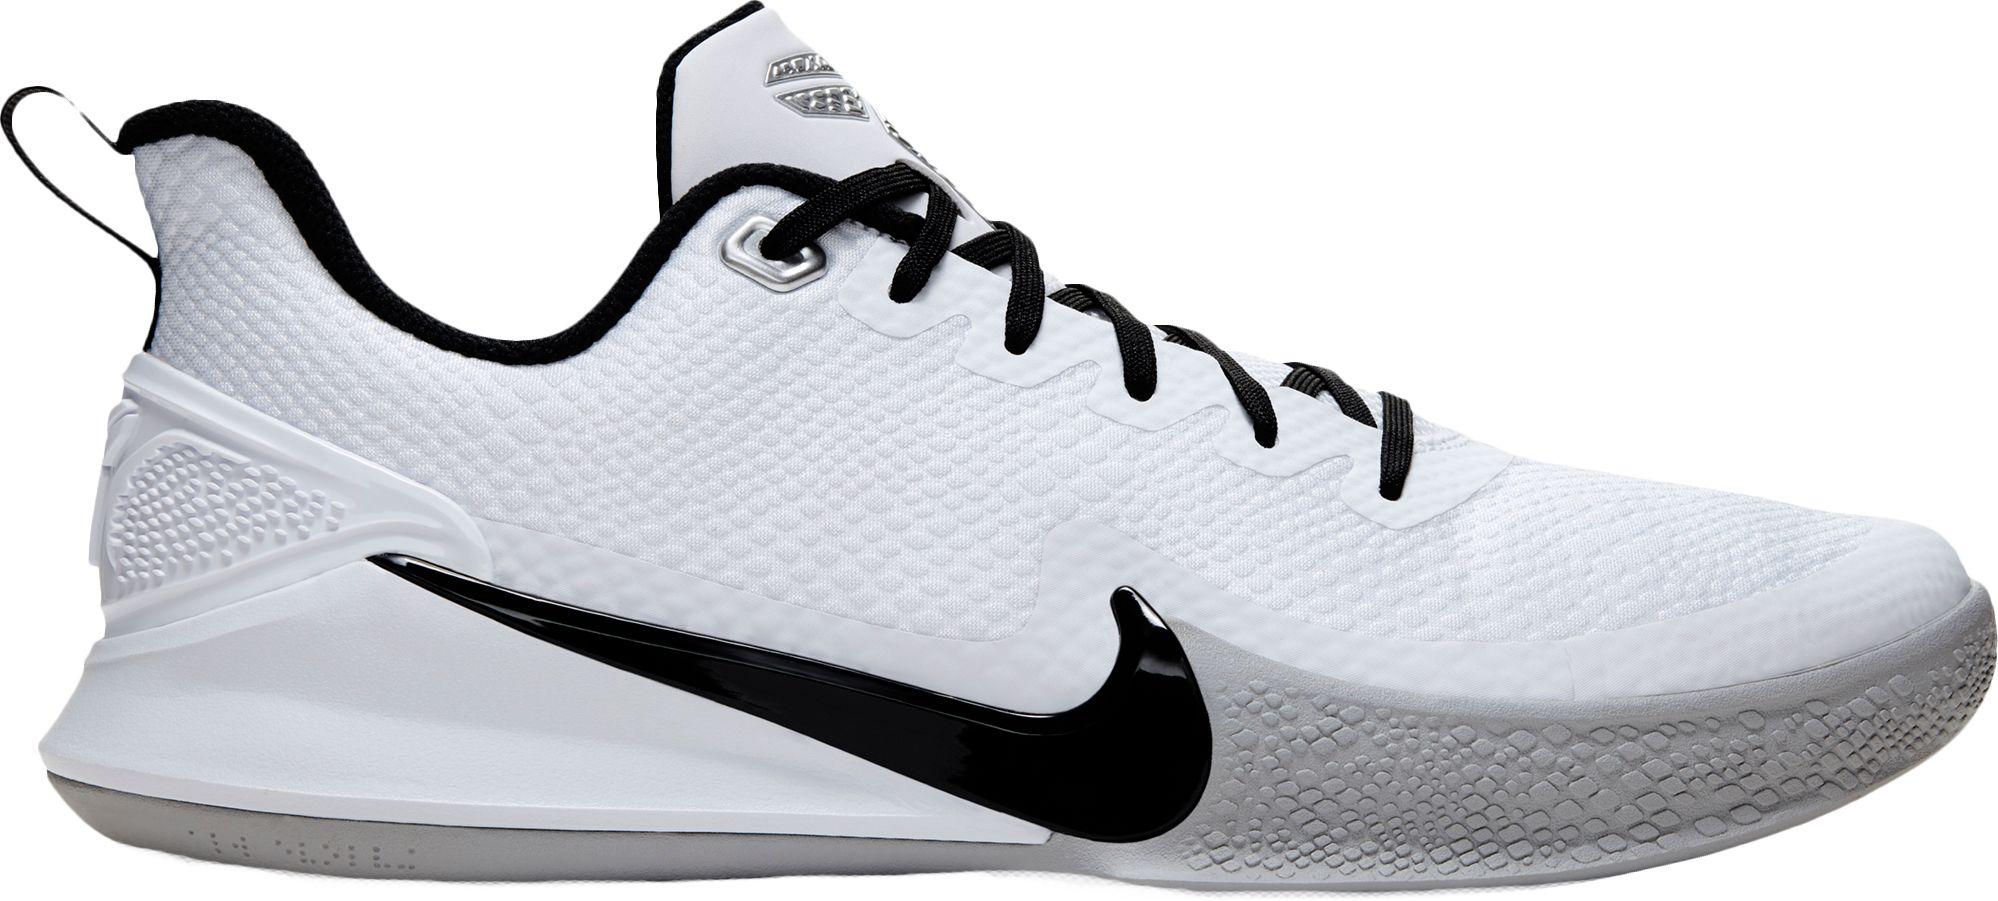 nike kobe mamba focus All products are discounted, Cheaper Than Retail  Price, Free Delivery & Returns OFF 75%